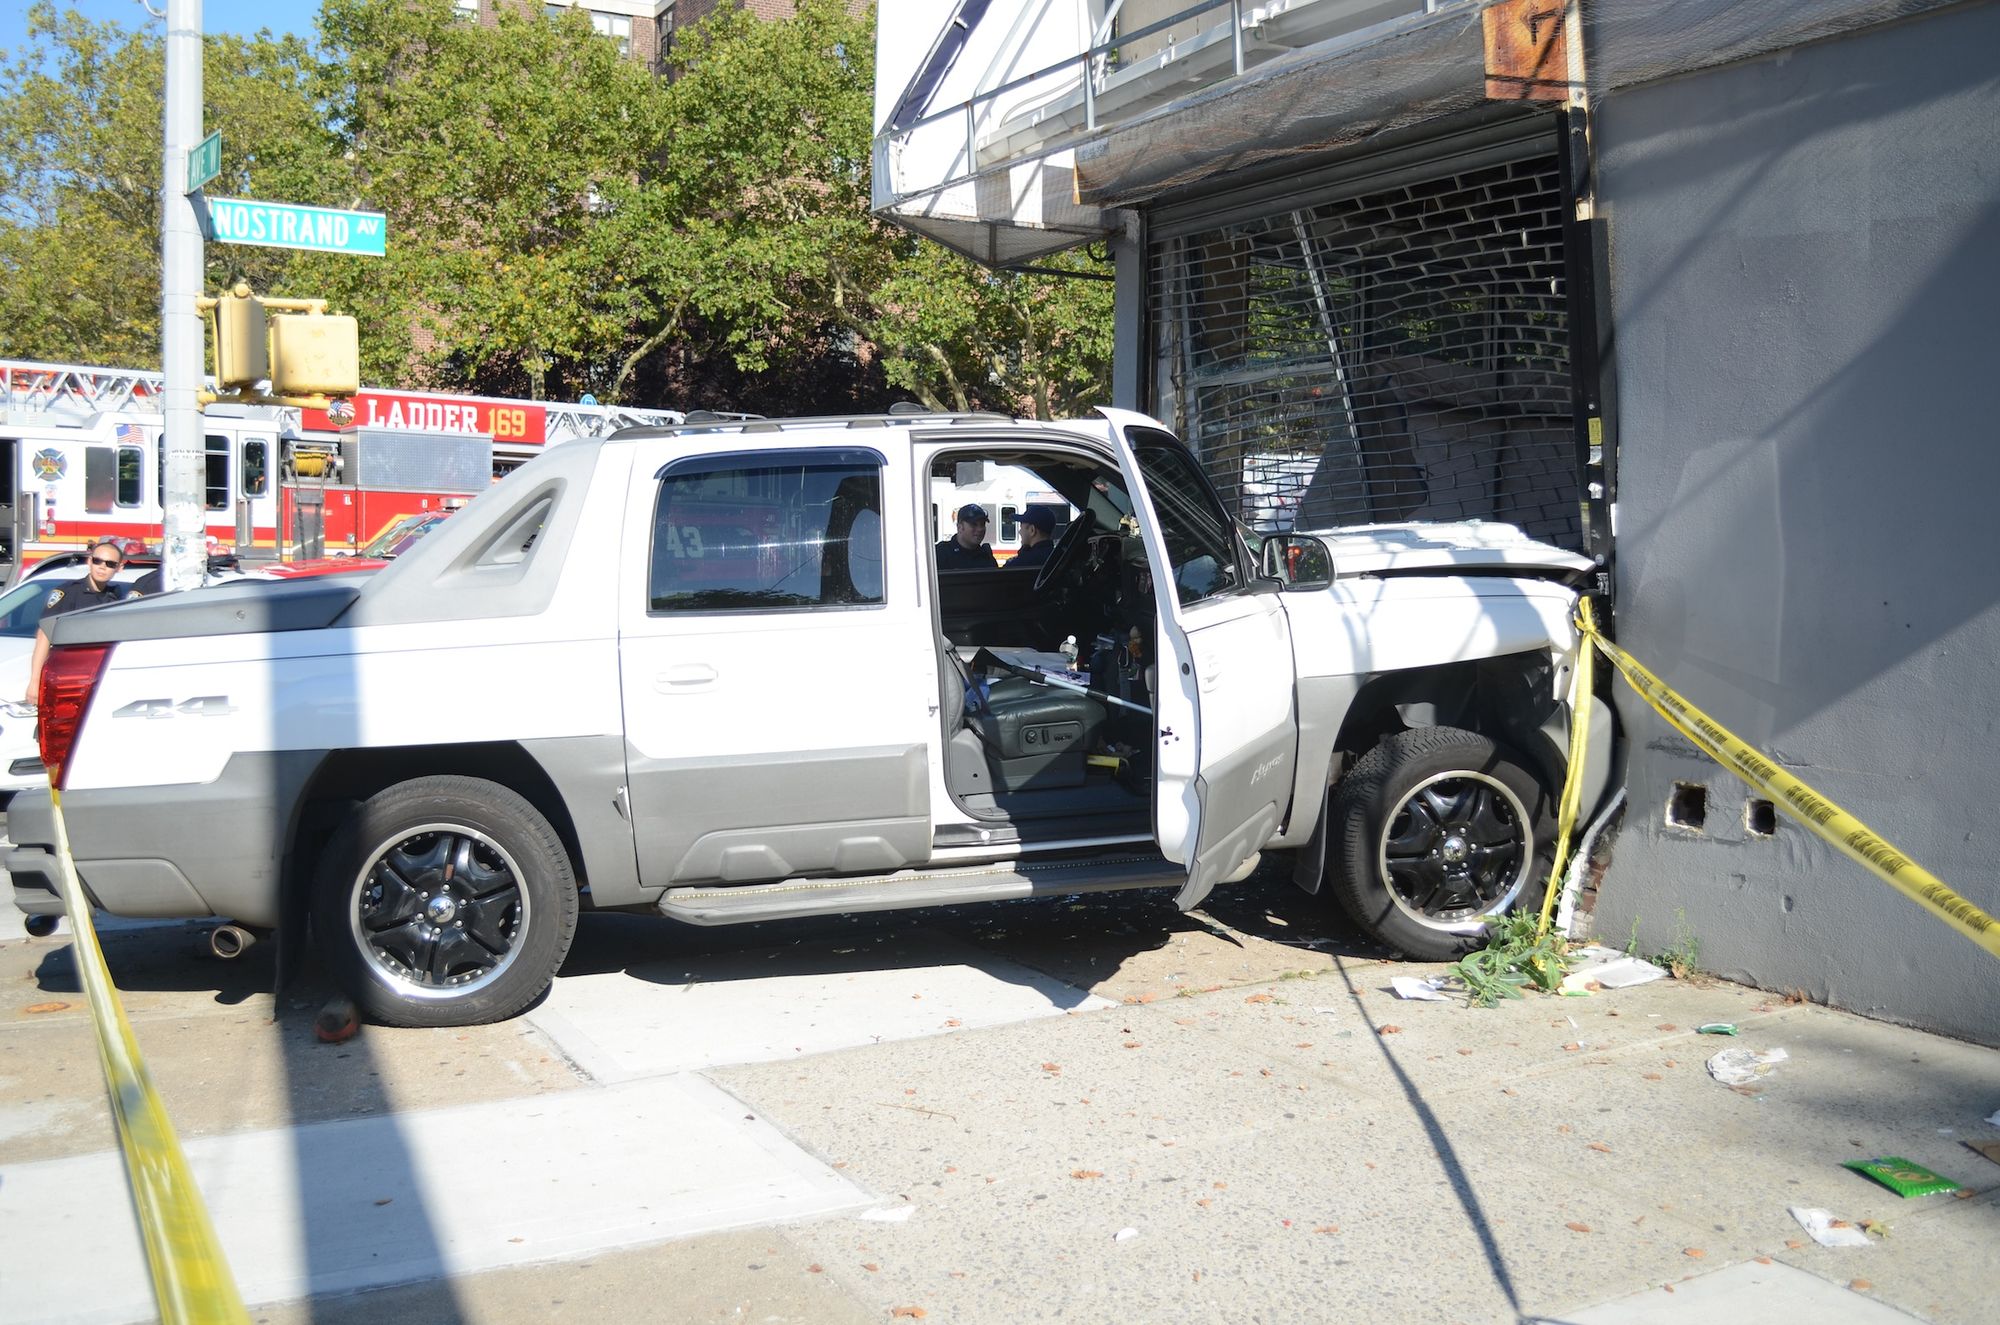 Truck Crashes Into Nostrand Avenue Storefront To Avoid Hitting Bicyclist